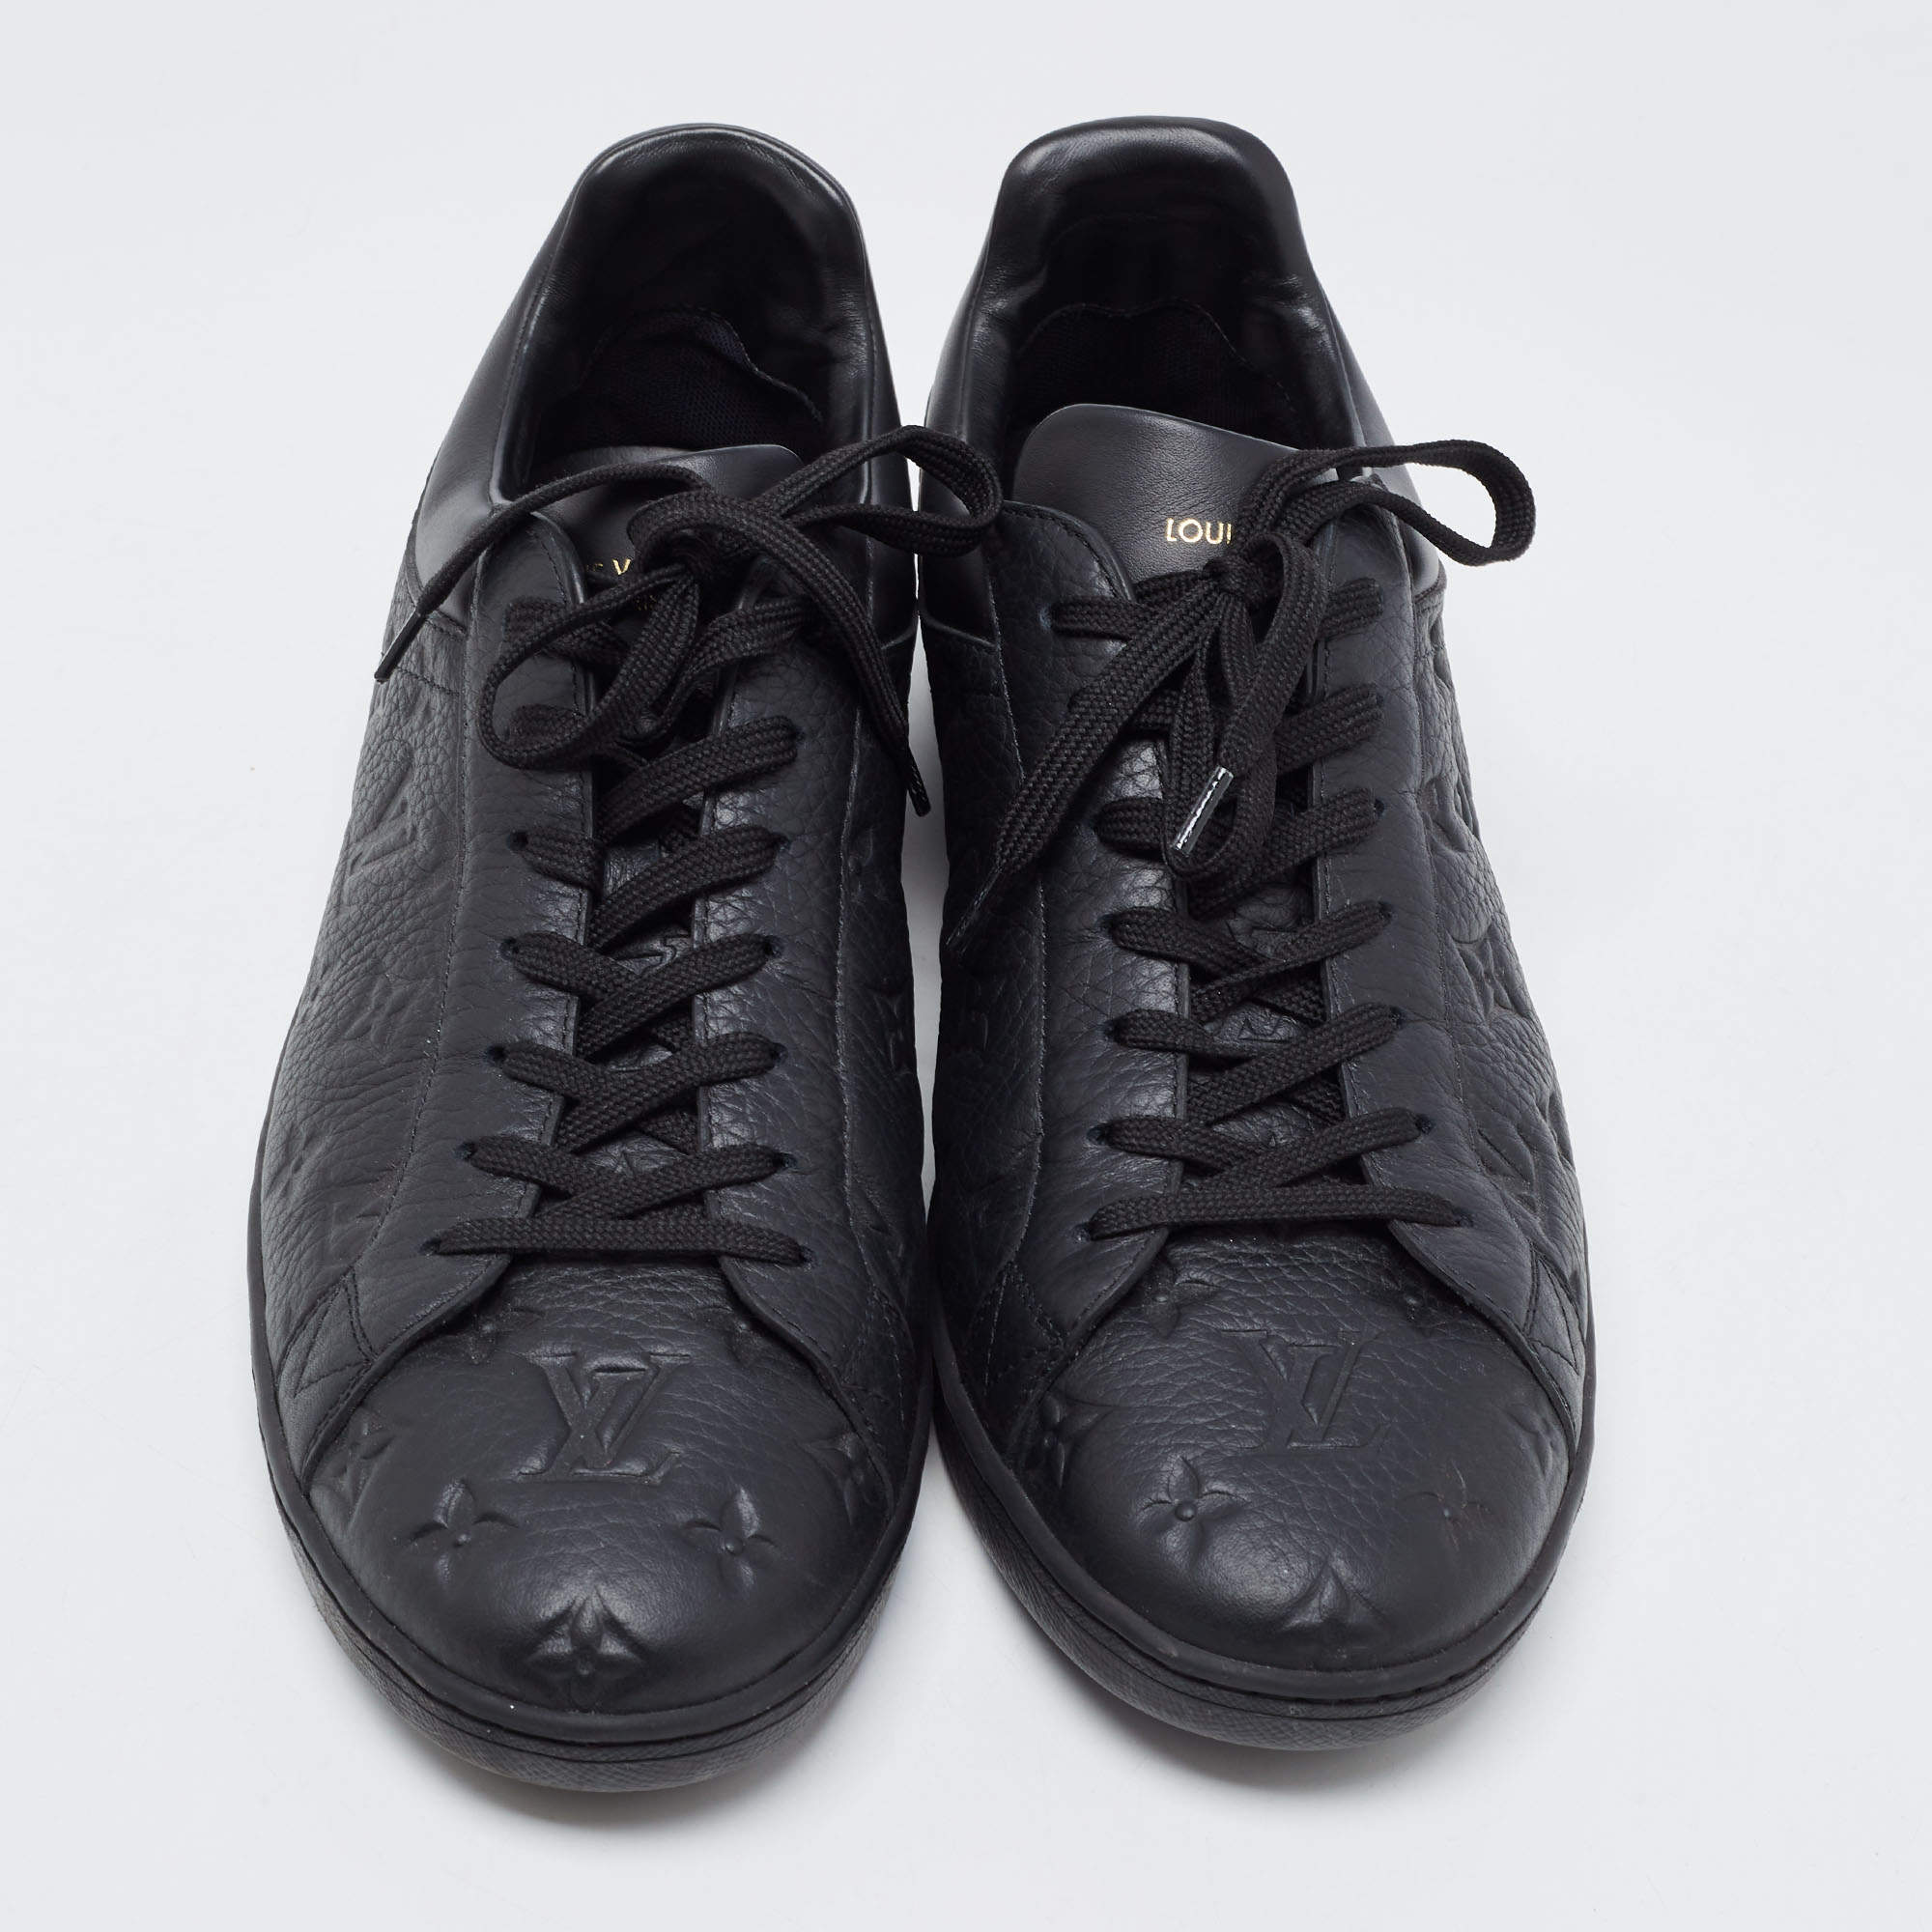 Luxembourg leather low trainers Louis Vuitton Black size 5 UK in Leather -  31793040